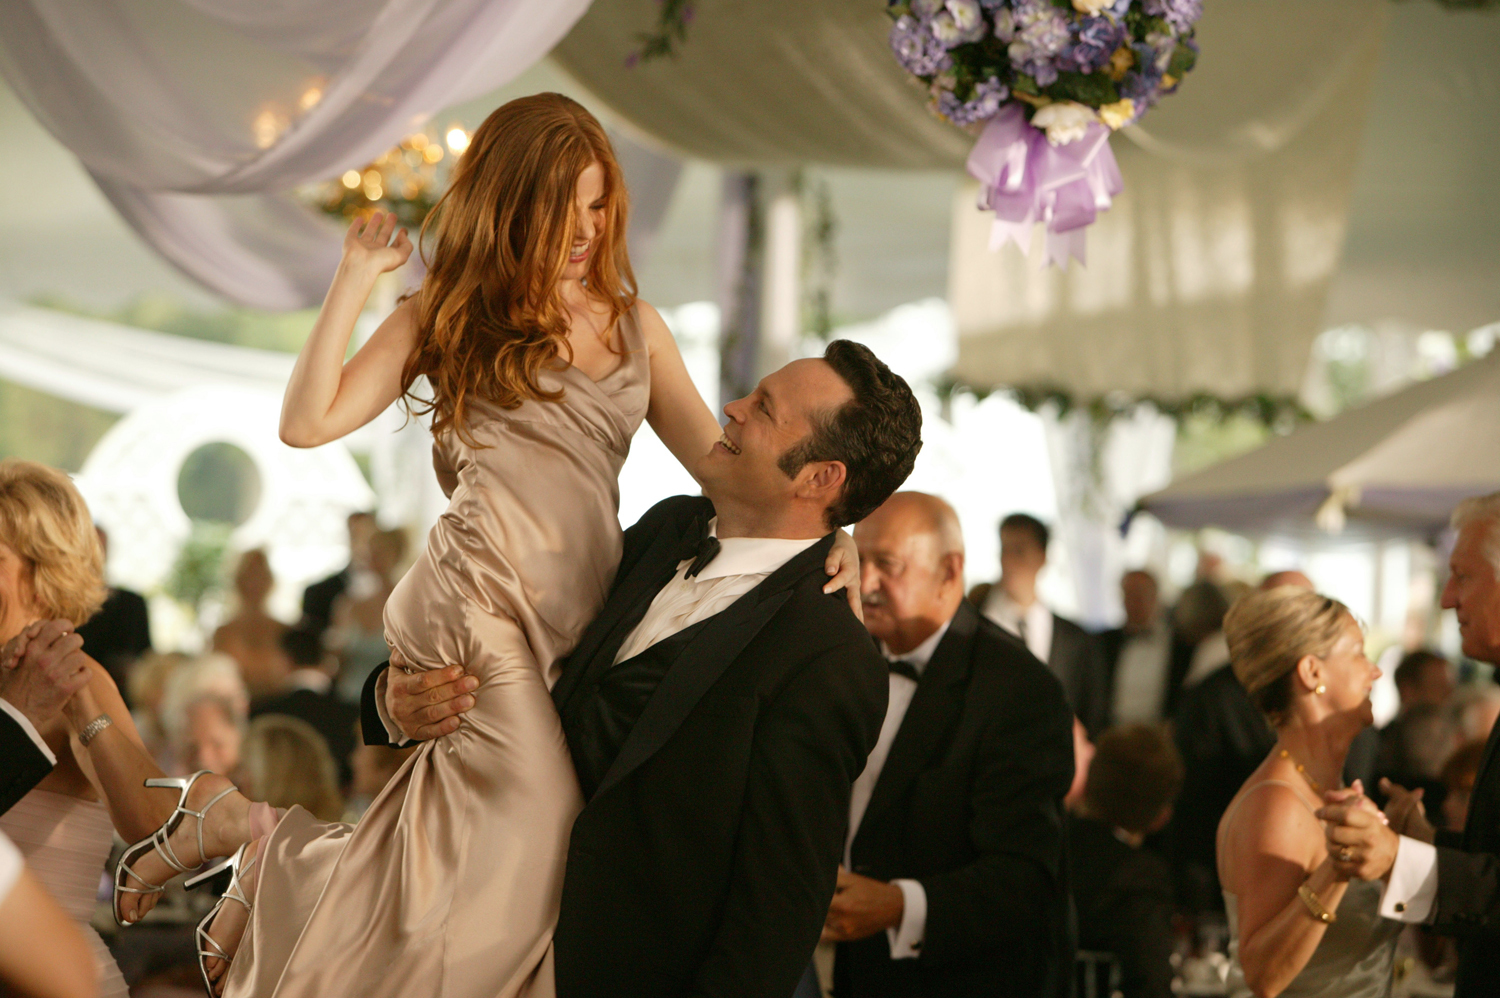 Still of Vince Vaughn and Isla Fisher in Wedding Crashers (2005)